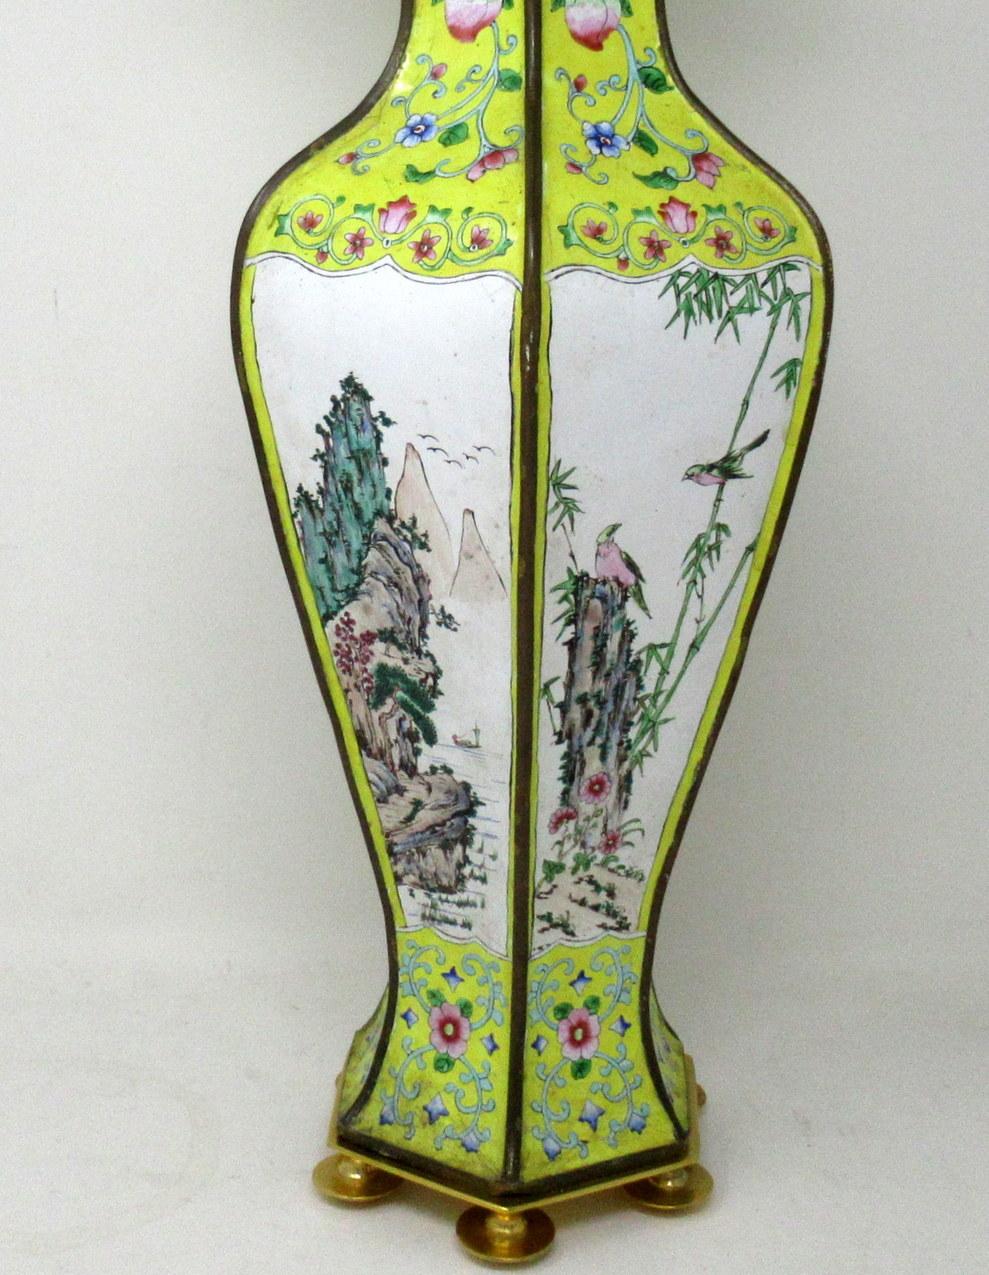 Antique Qing Dynasty Chinese Cantonese Enamel Table Lamp and Vase Yellow Green In Good Condition For Sale In Dublin, Ireland